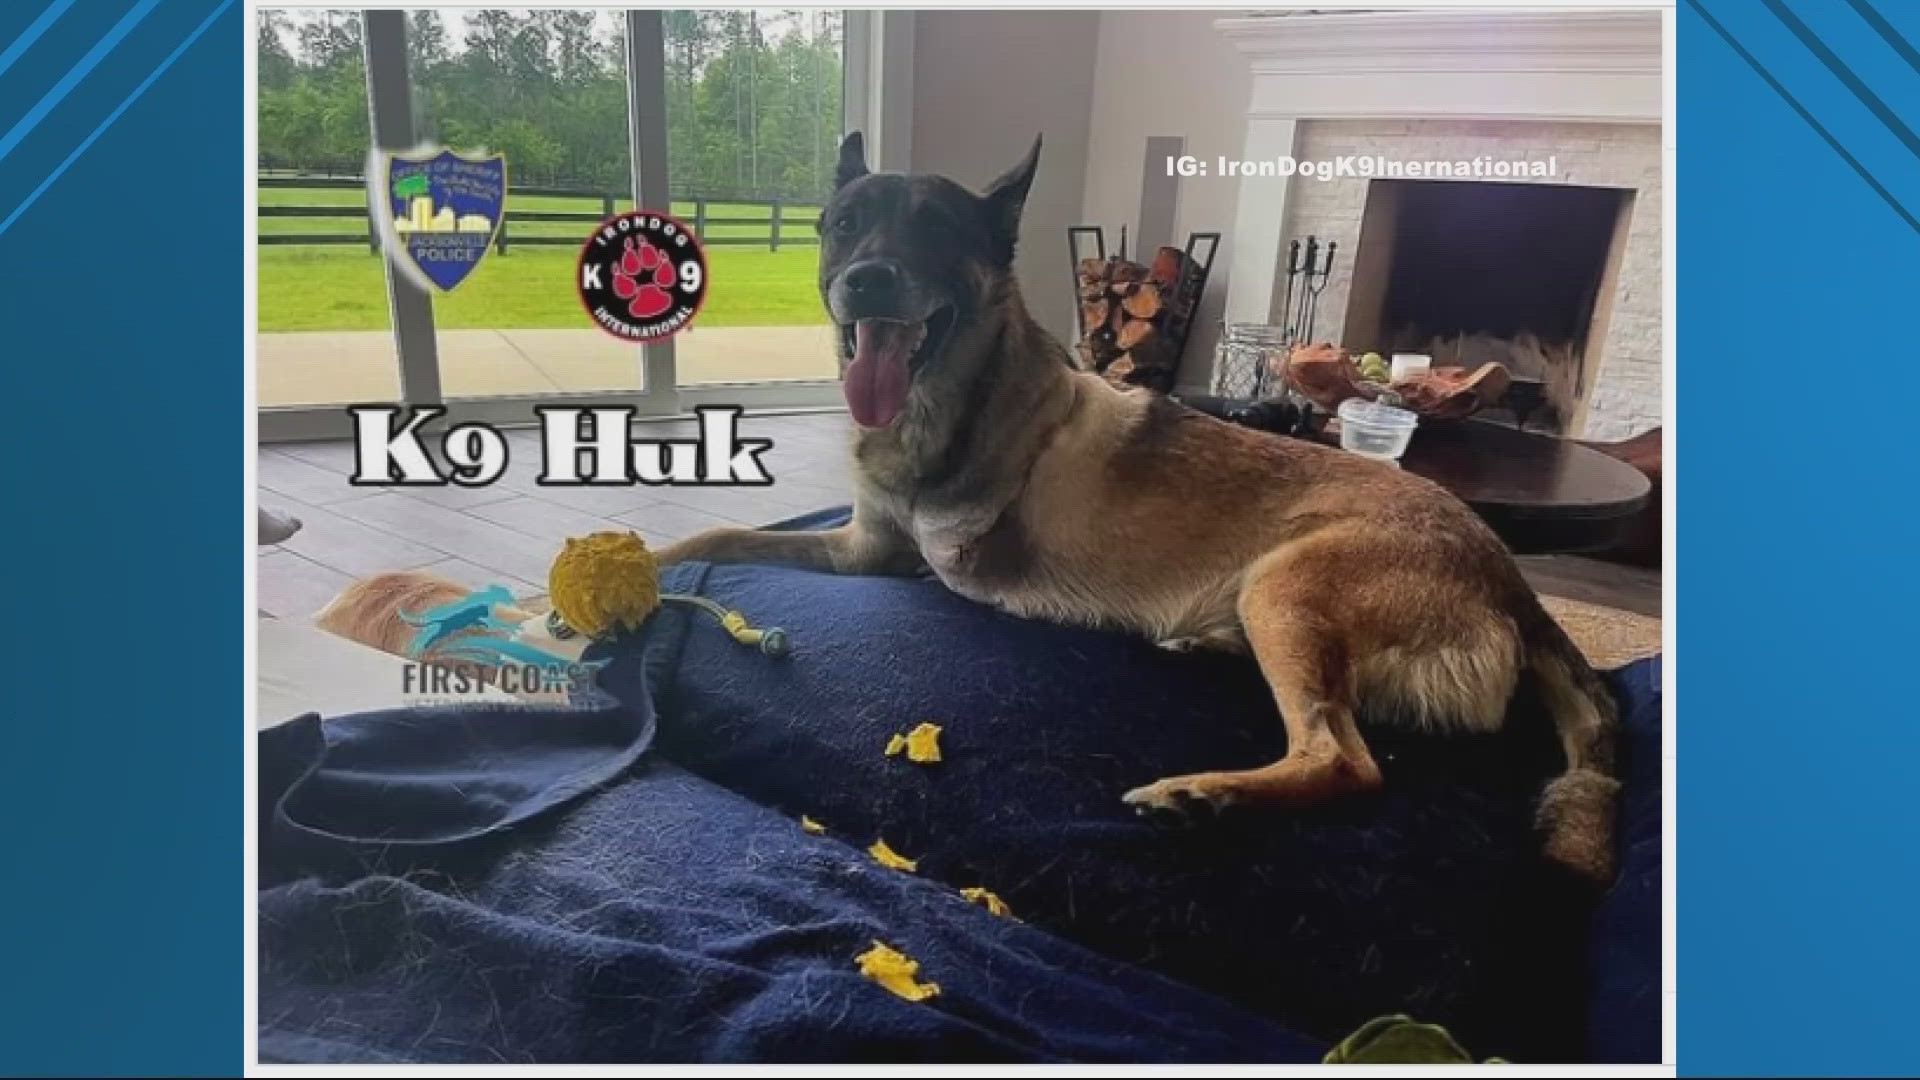 Injured JSO K-9 Huk on his way to recovery after getting leg